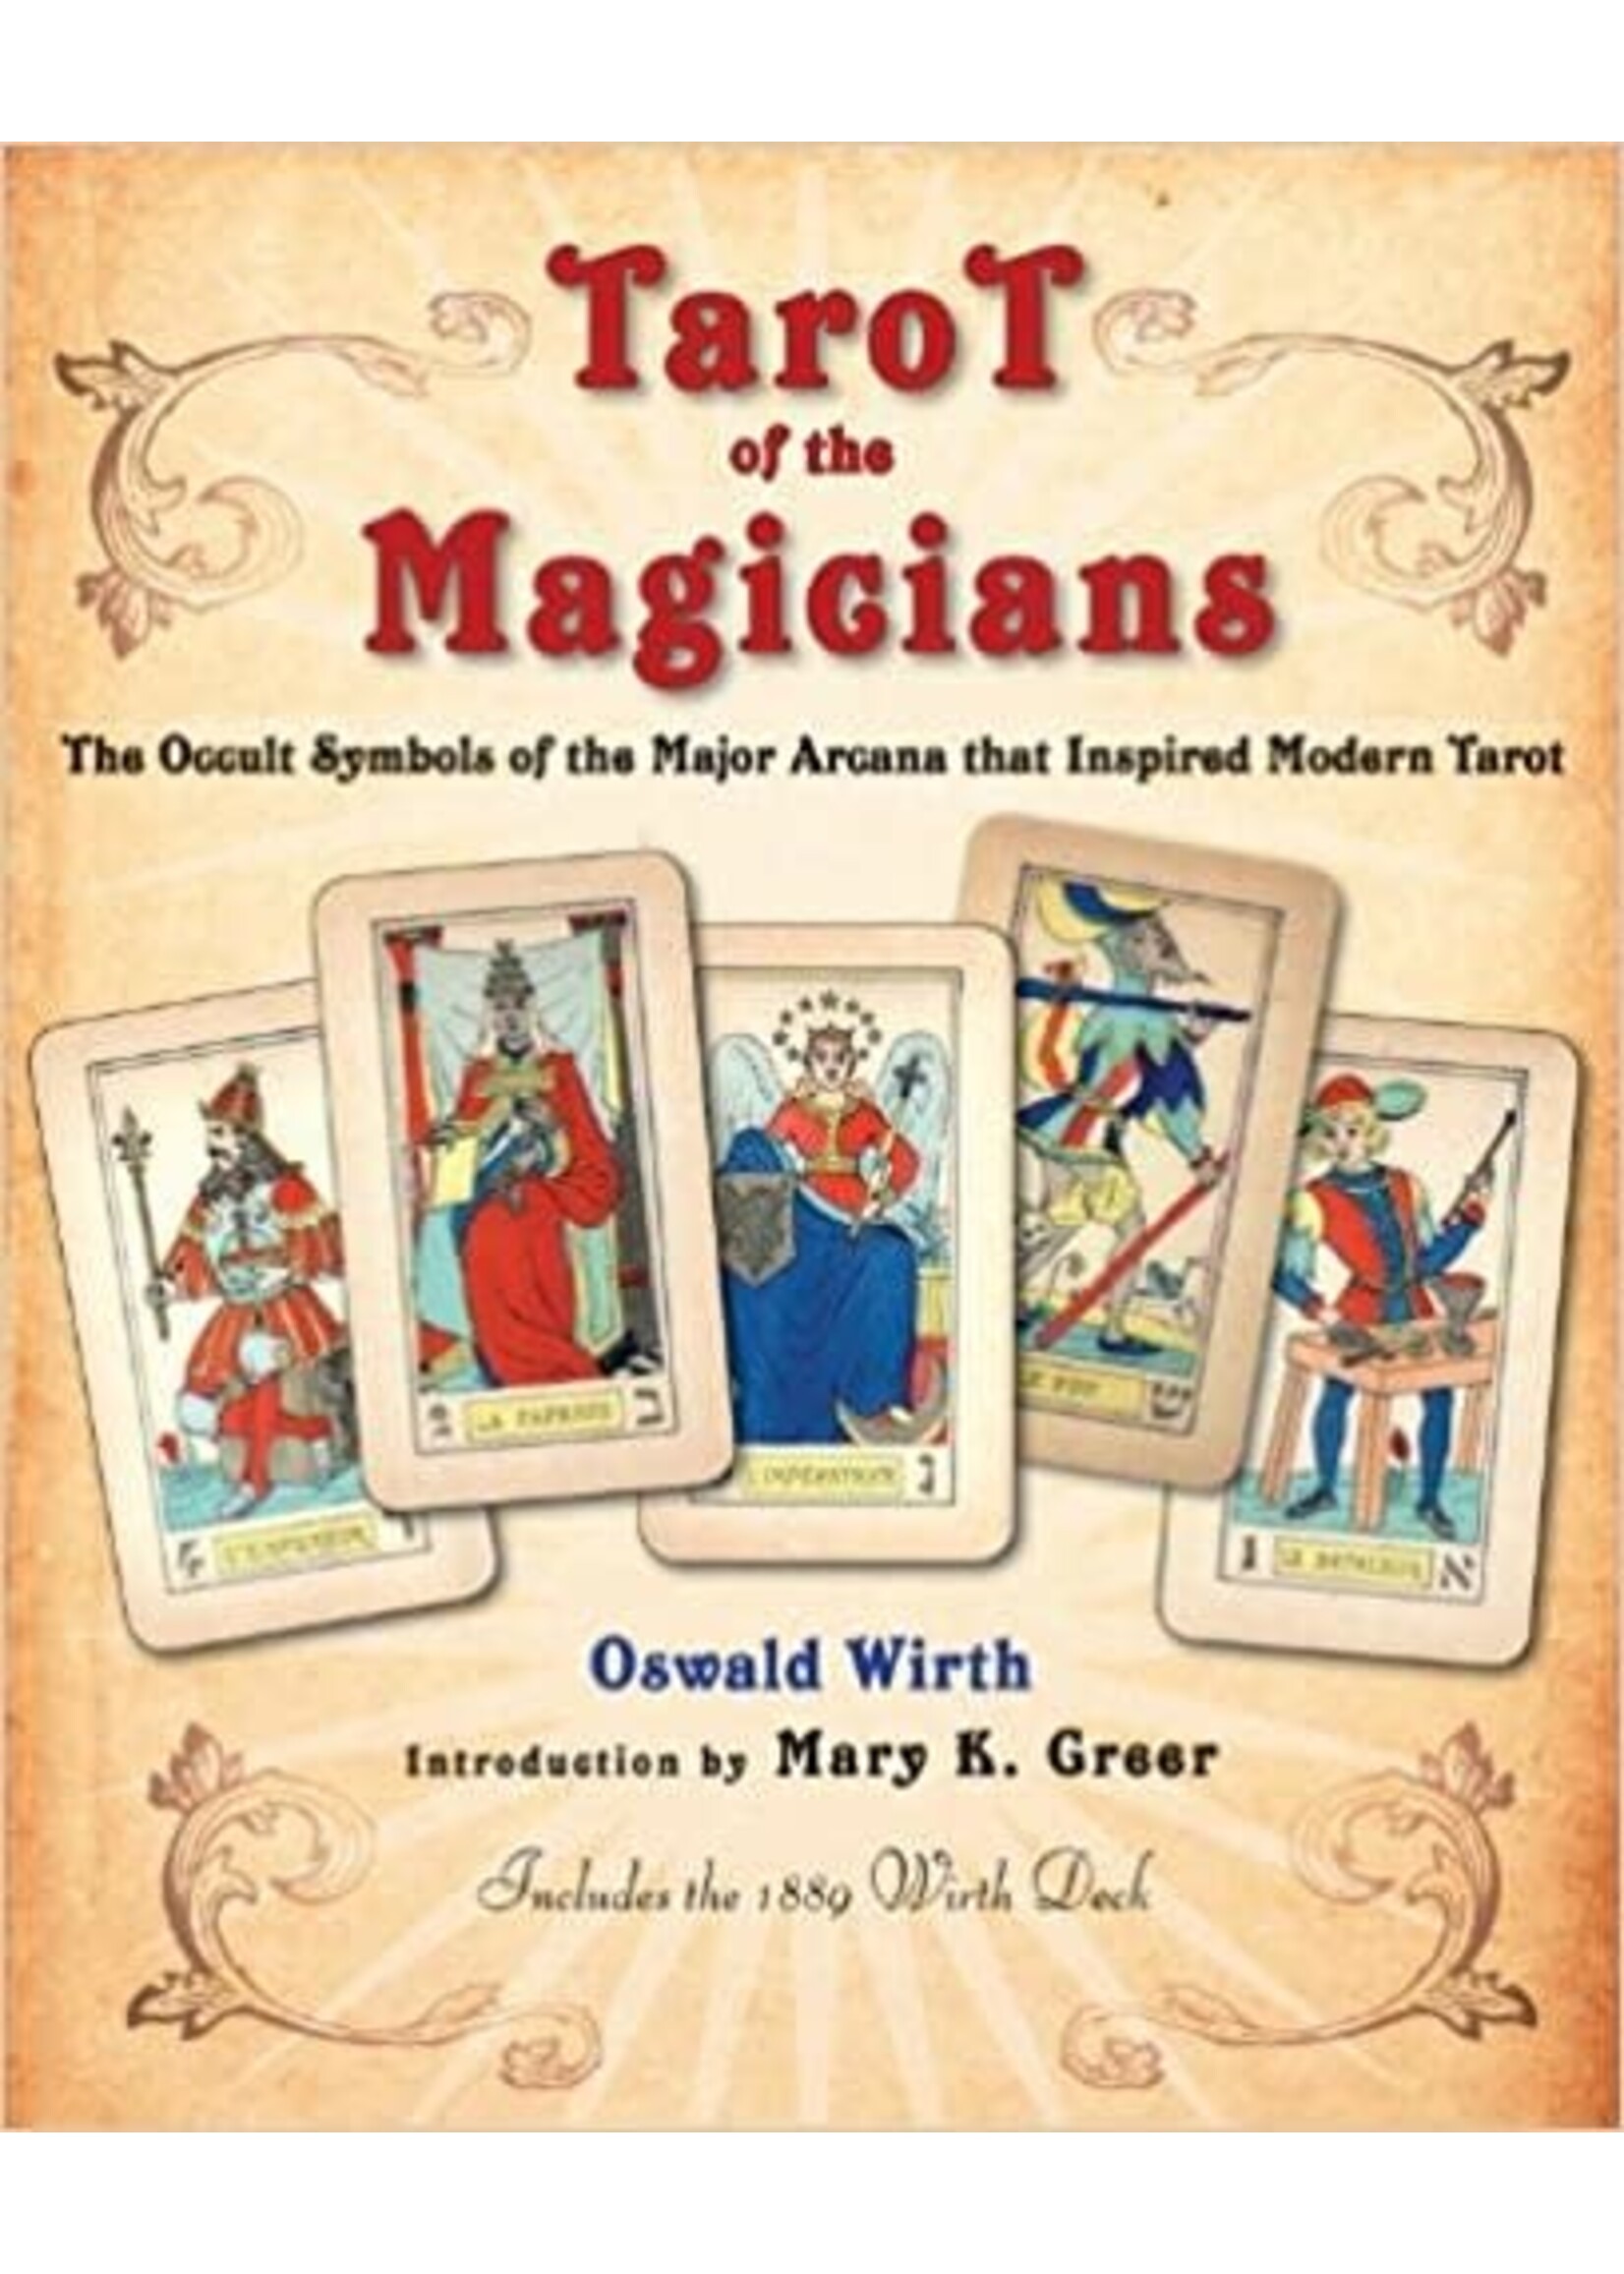 Tarot of the Magicians by Oswald Wirth